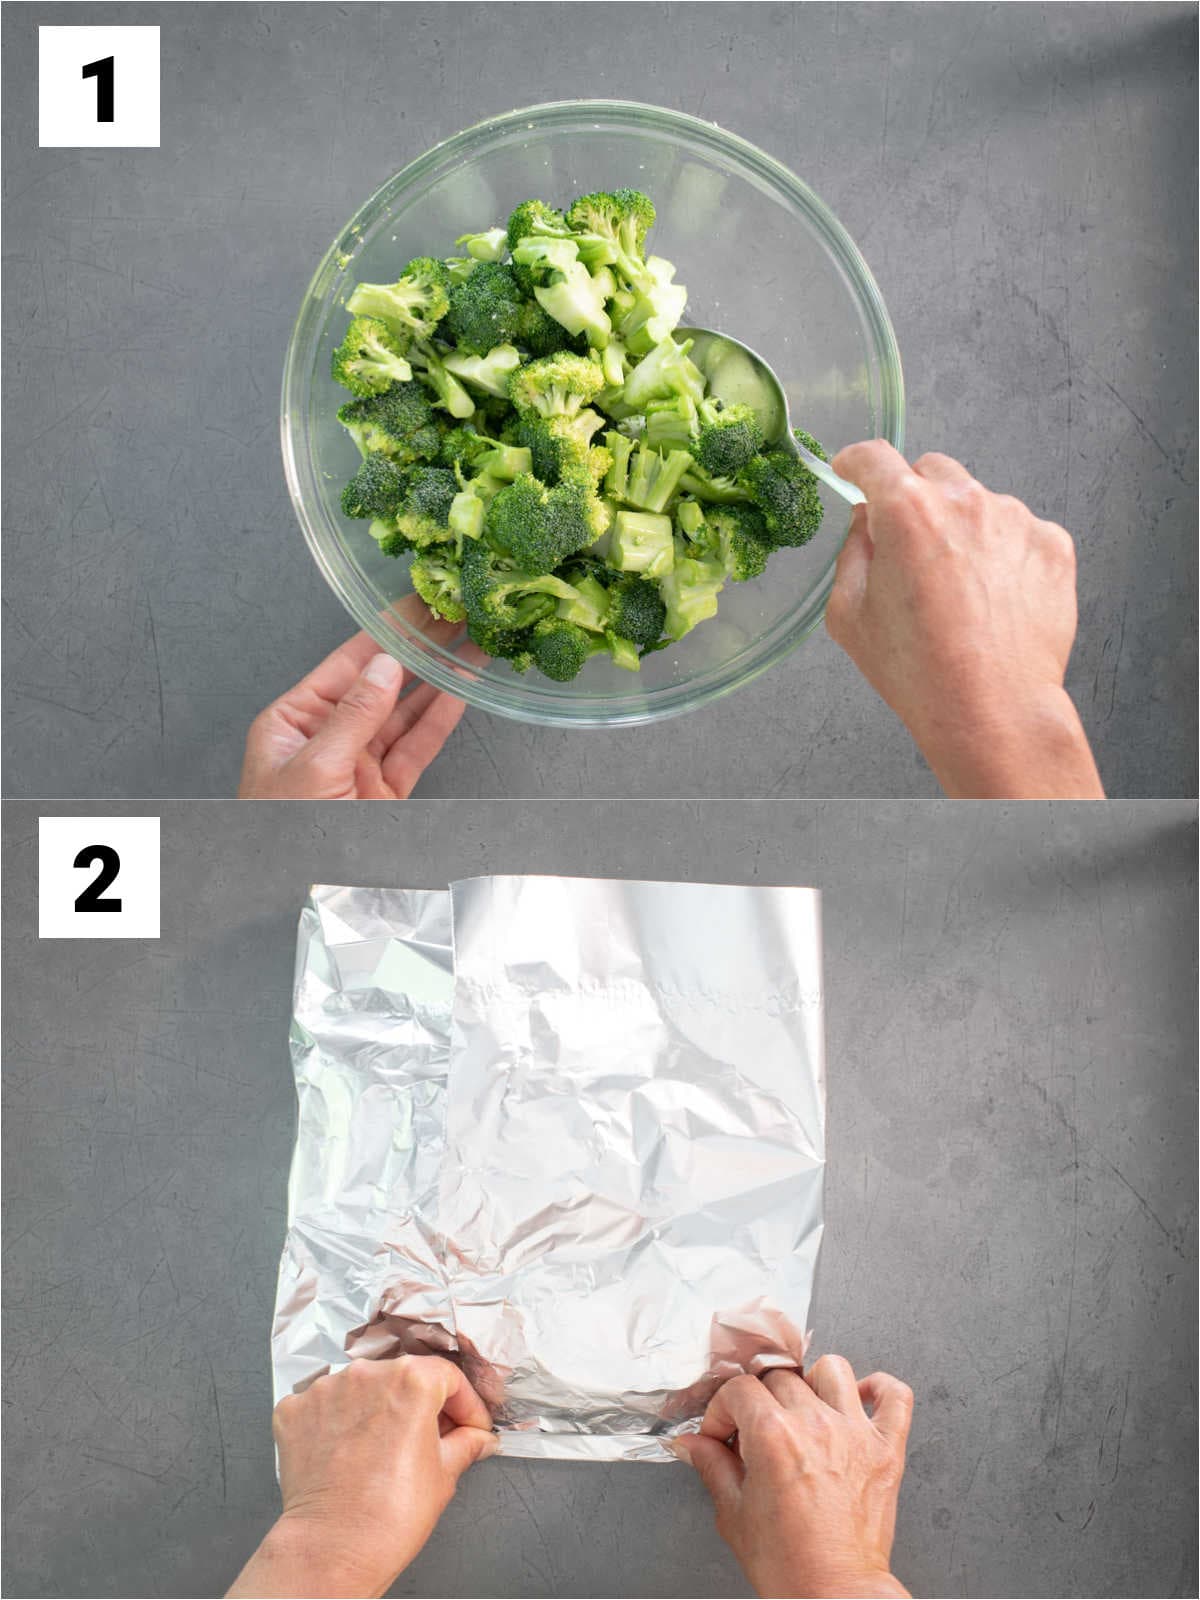 tossing broccoli in a bowl with oil, salt, and garlic powder, and on the bottom two hands are preparing the foil